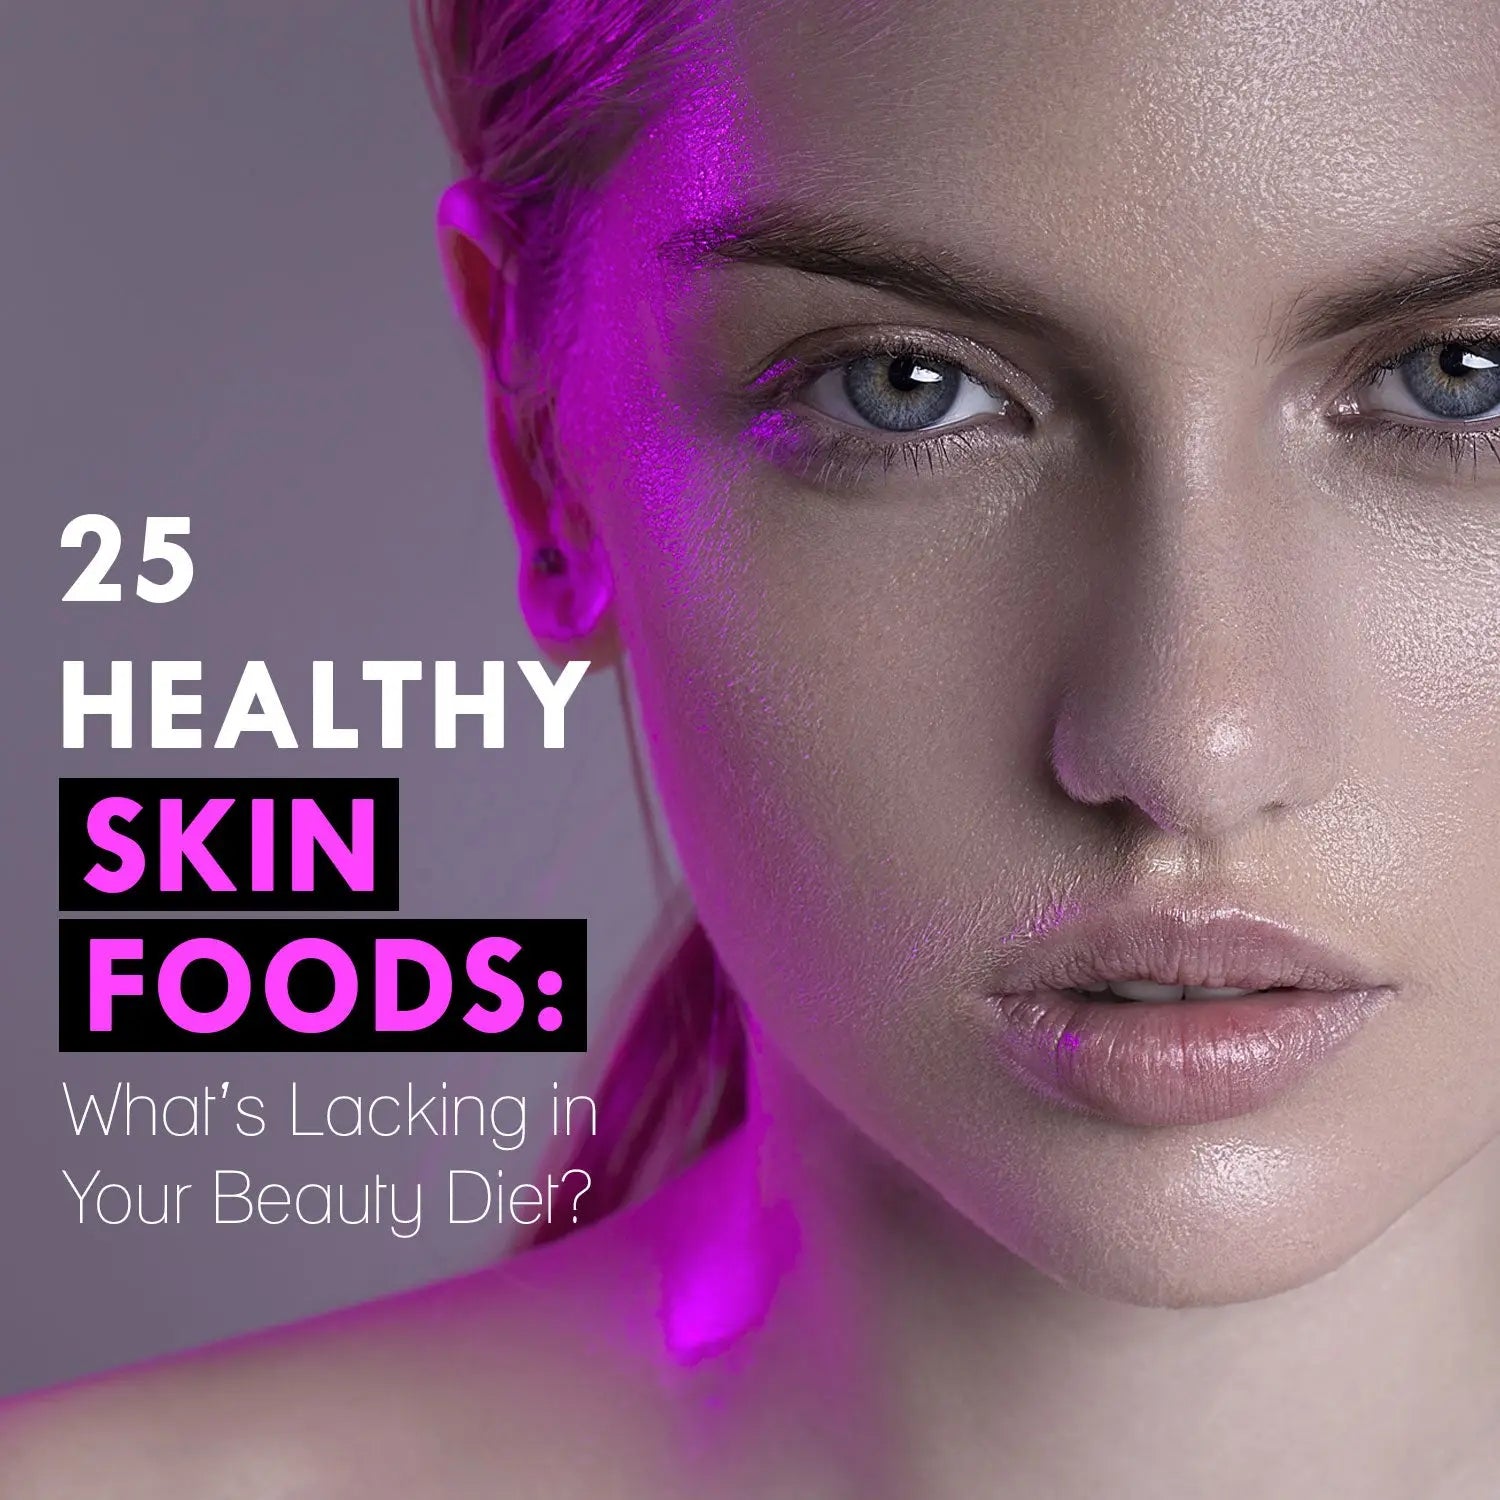 25 HEALTHY SKIN FOODS: WHAT’S LACKING IN YOUR BEAUTY DIET?